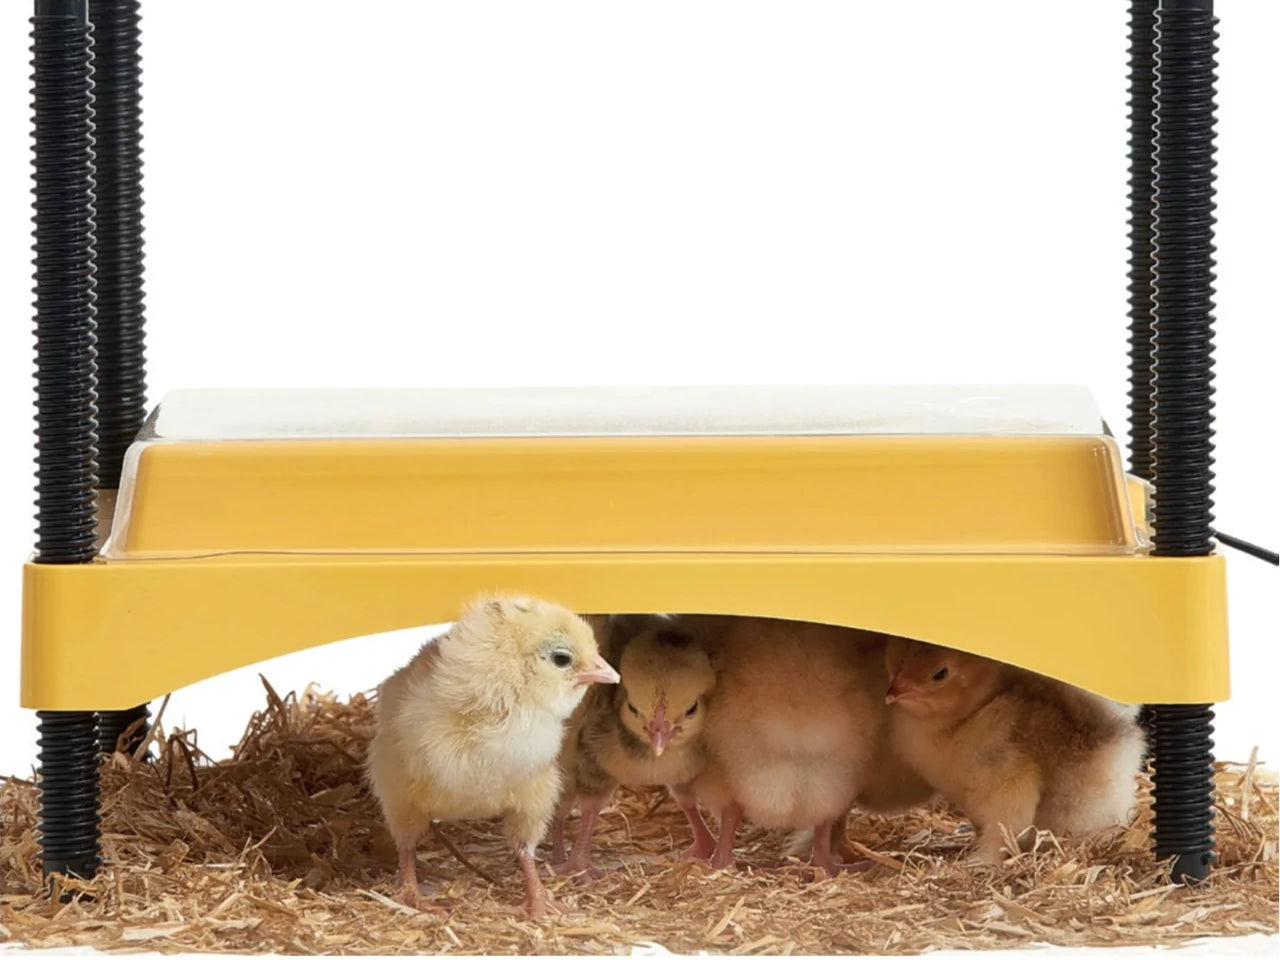 the variables of hatching are what makes breeding poultry a challenge